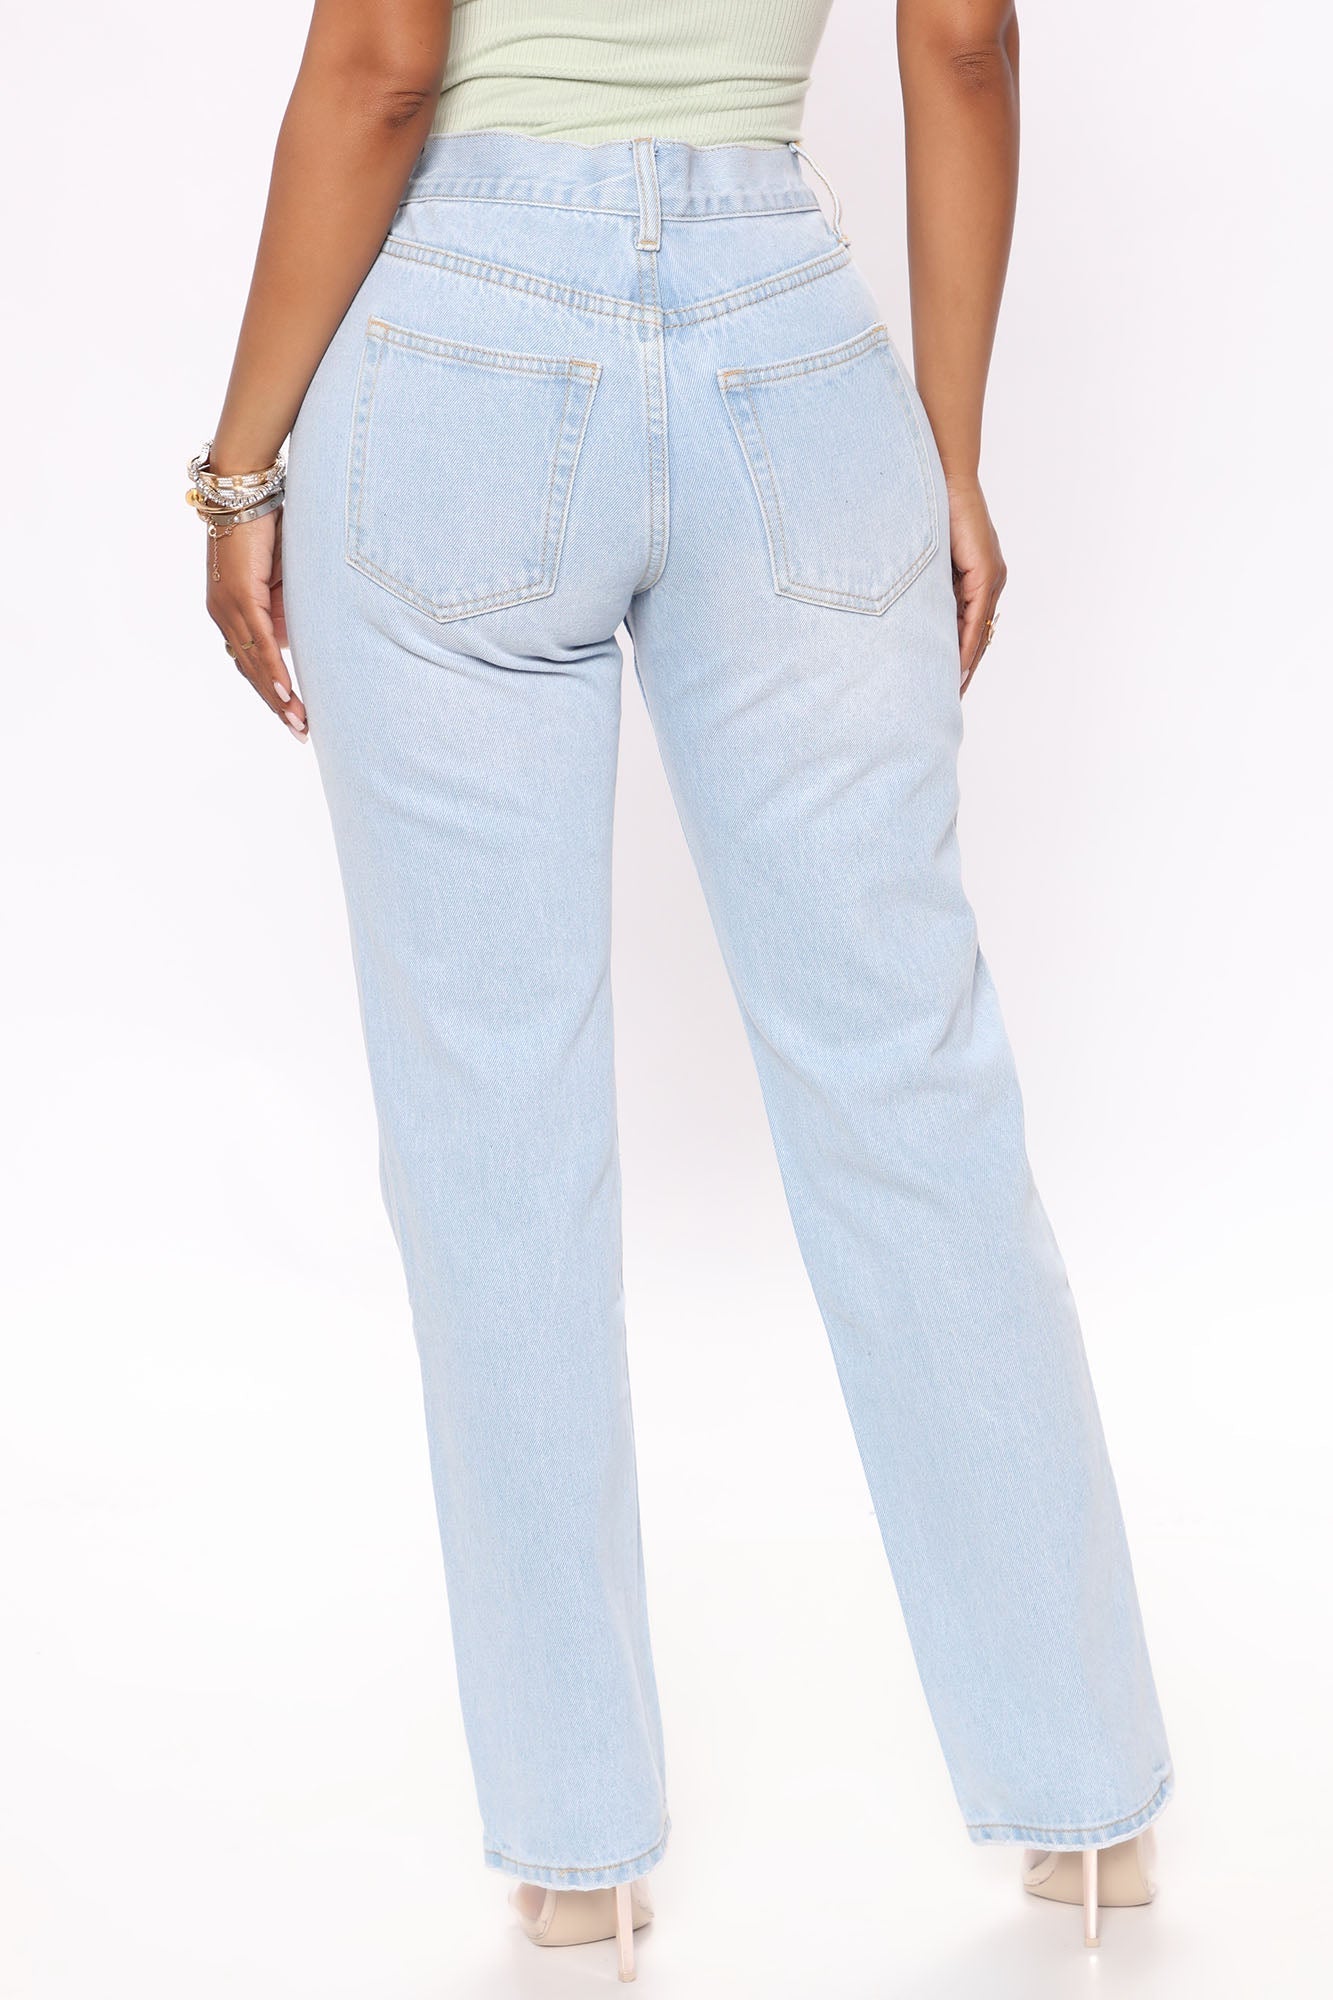 Lost Your Number Slouchy Straight Leg Jeans - Light Blue Wash